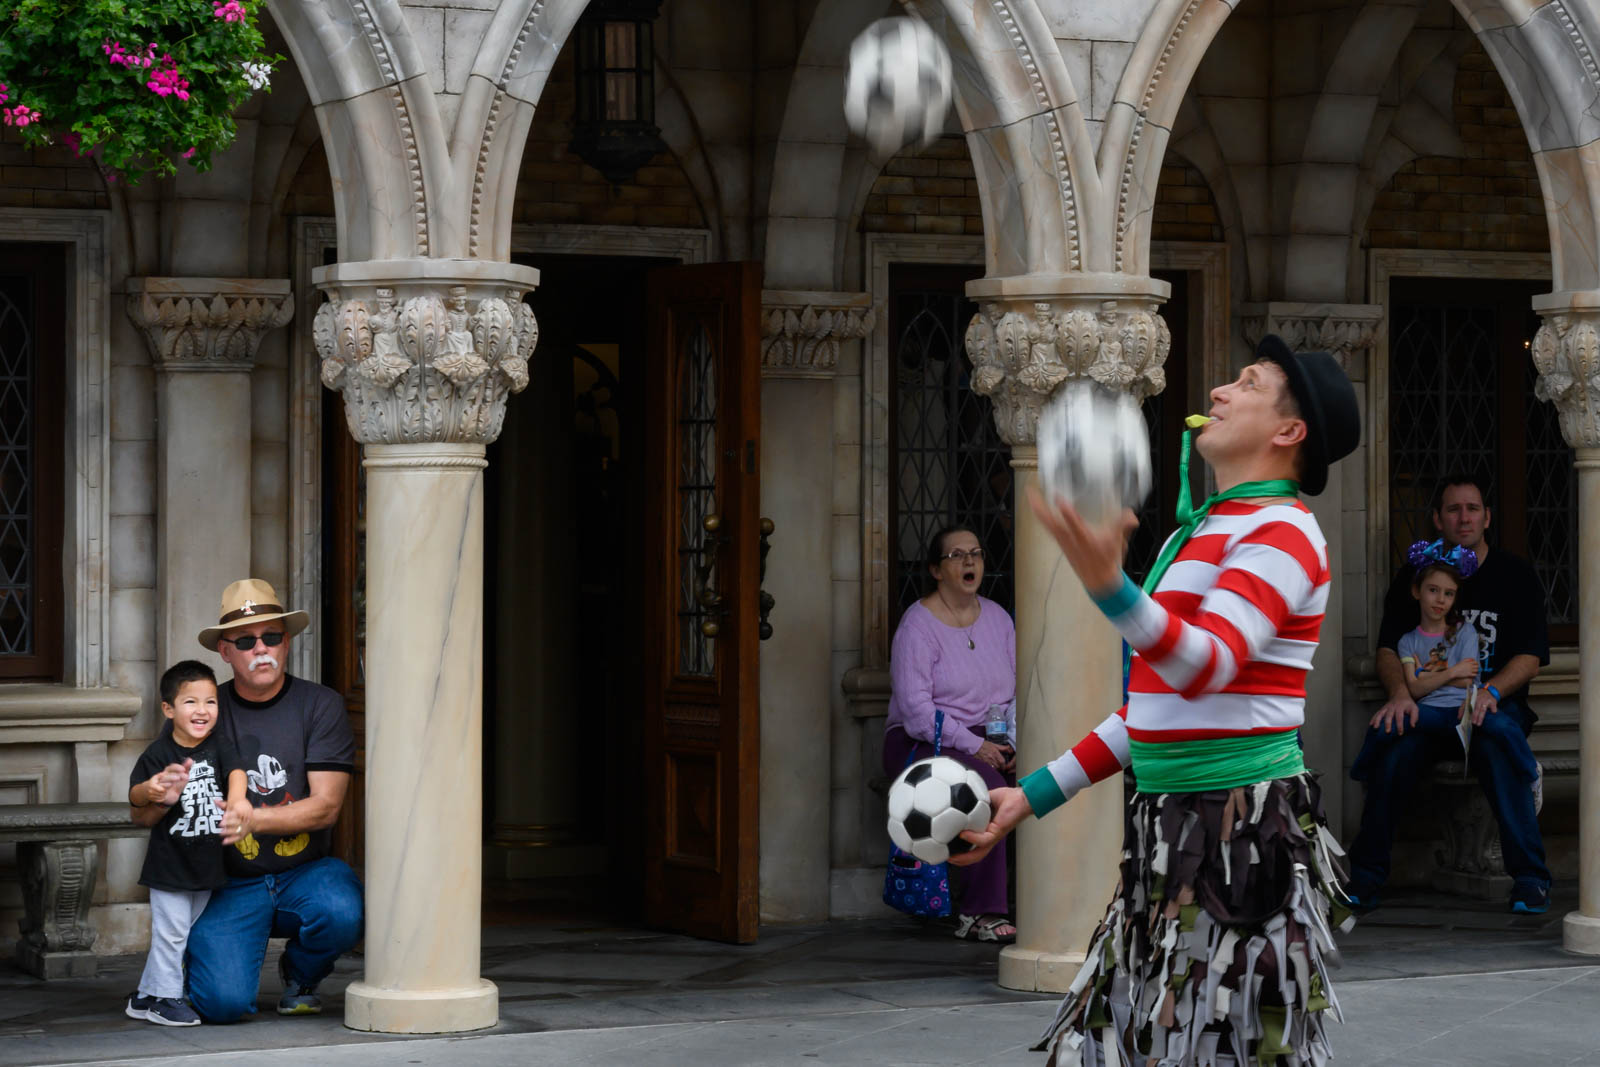 man juggling soccer balls with a whistle in his mouth